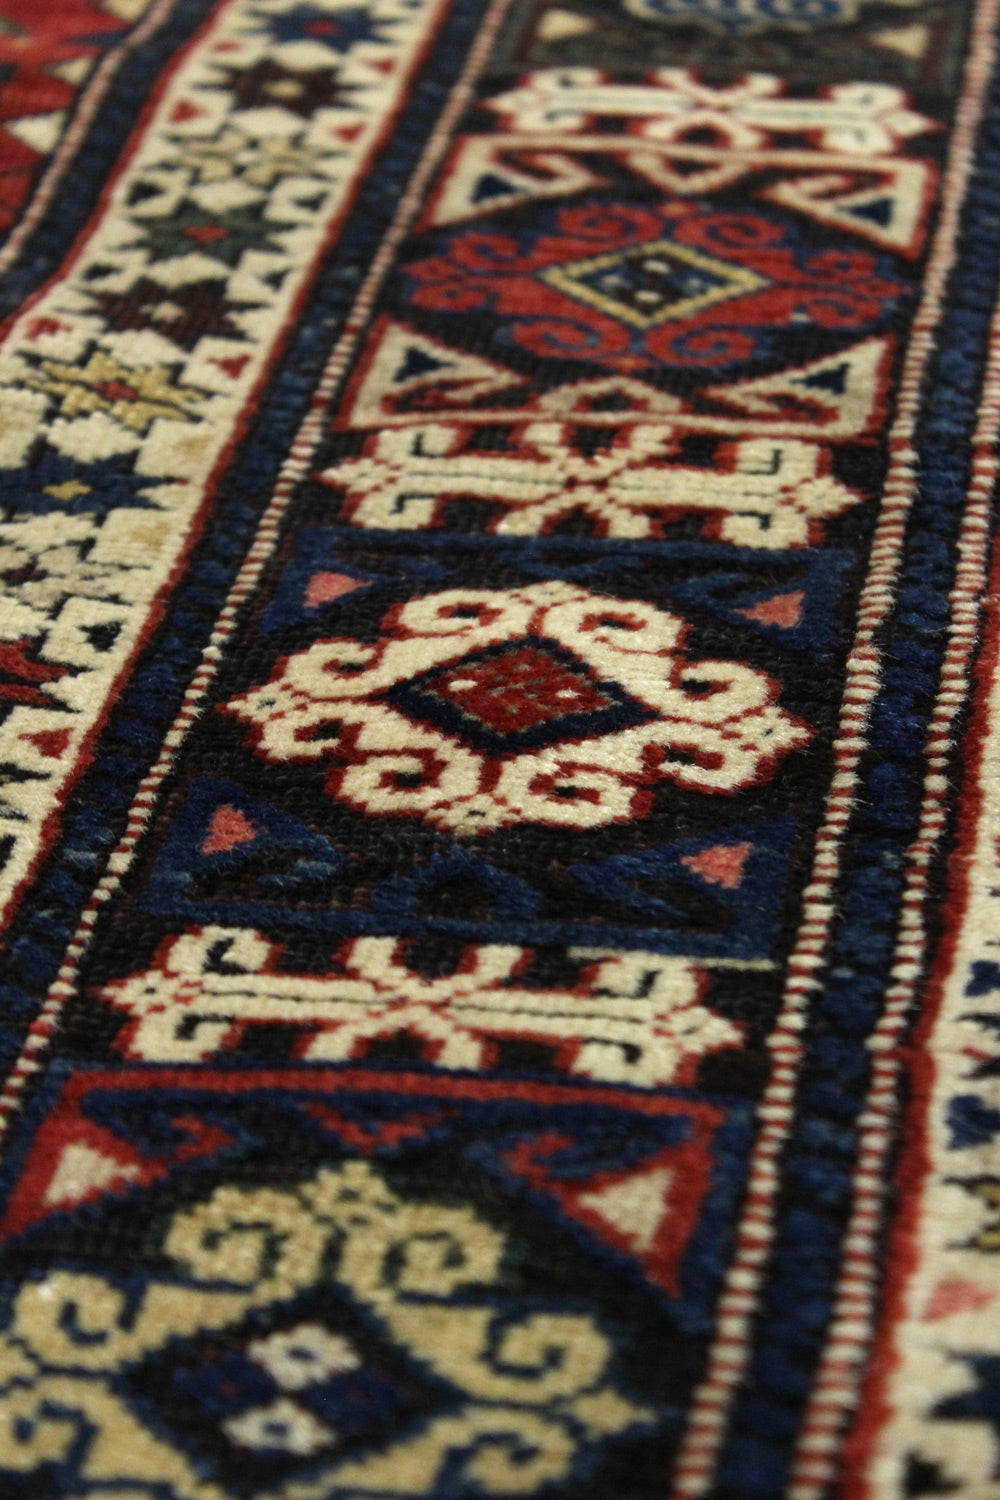 Antique Chi Chi Handwoven Tribal Rug, JF8596